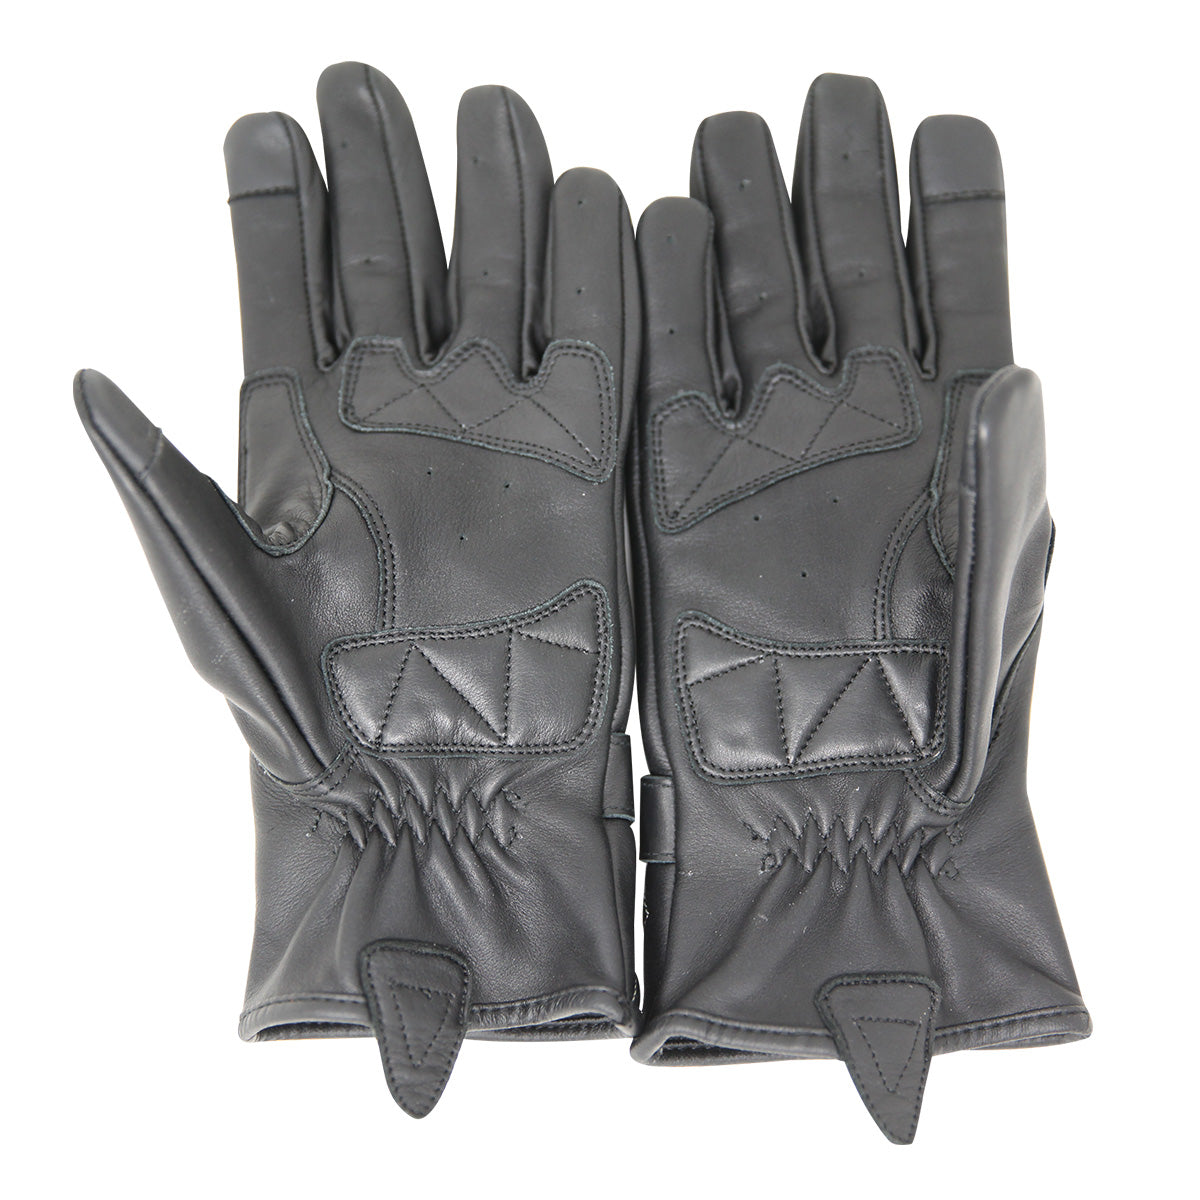 Vance Leather Women's Premium Waxed Leather Motorcycle Gloves w/White Stitching